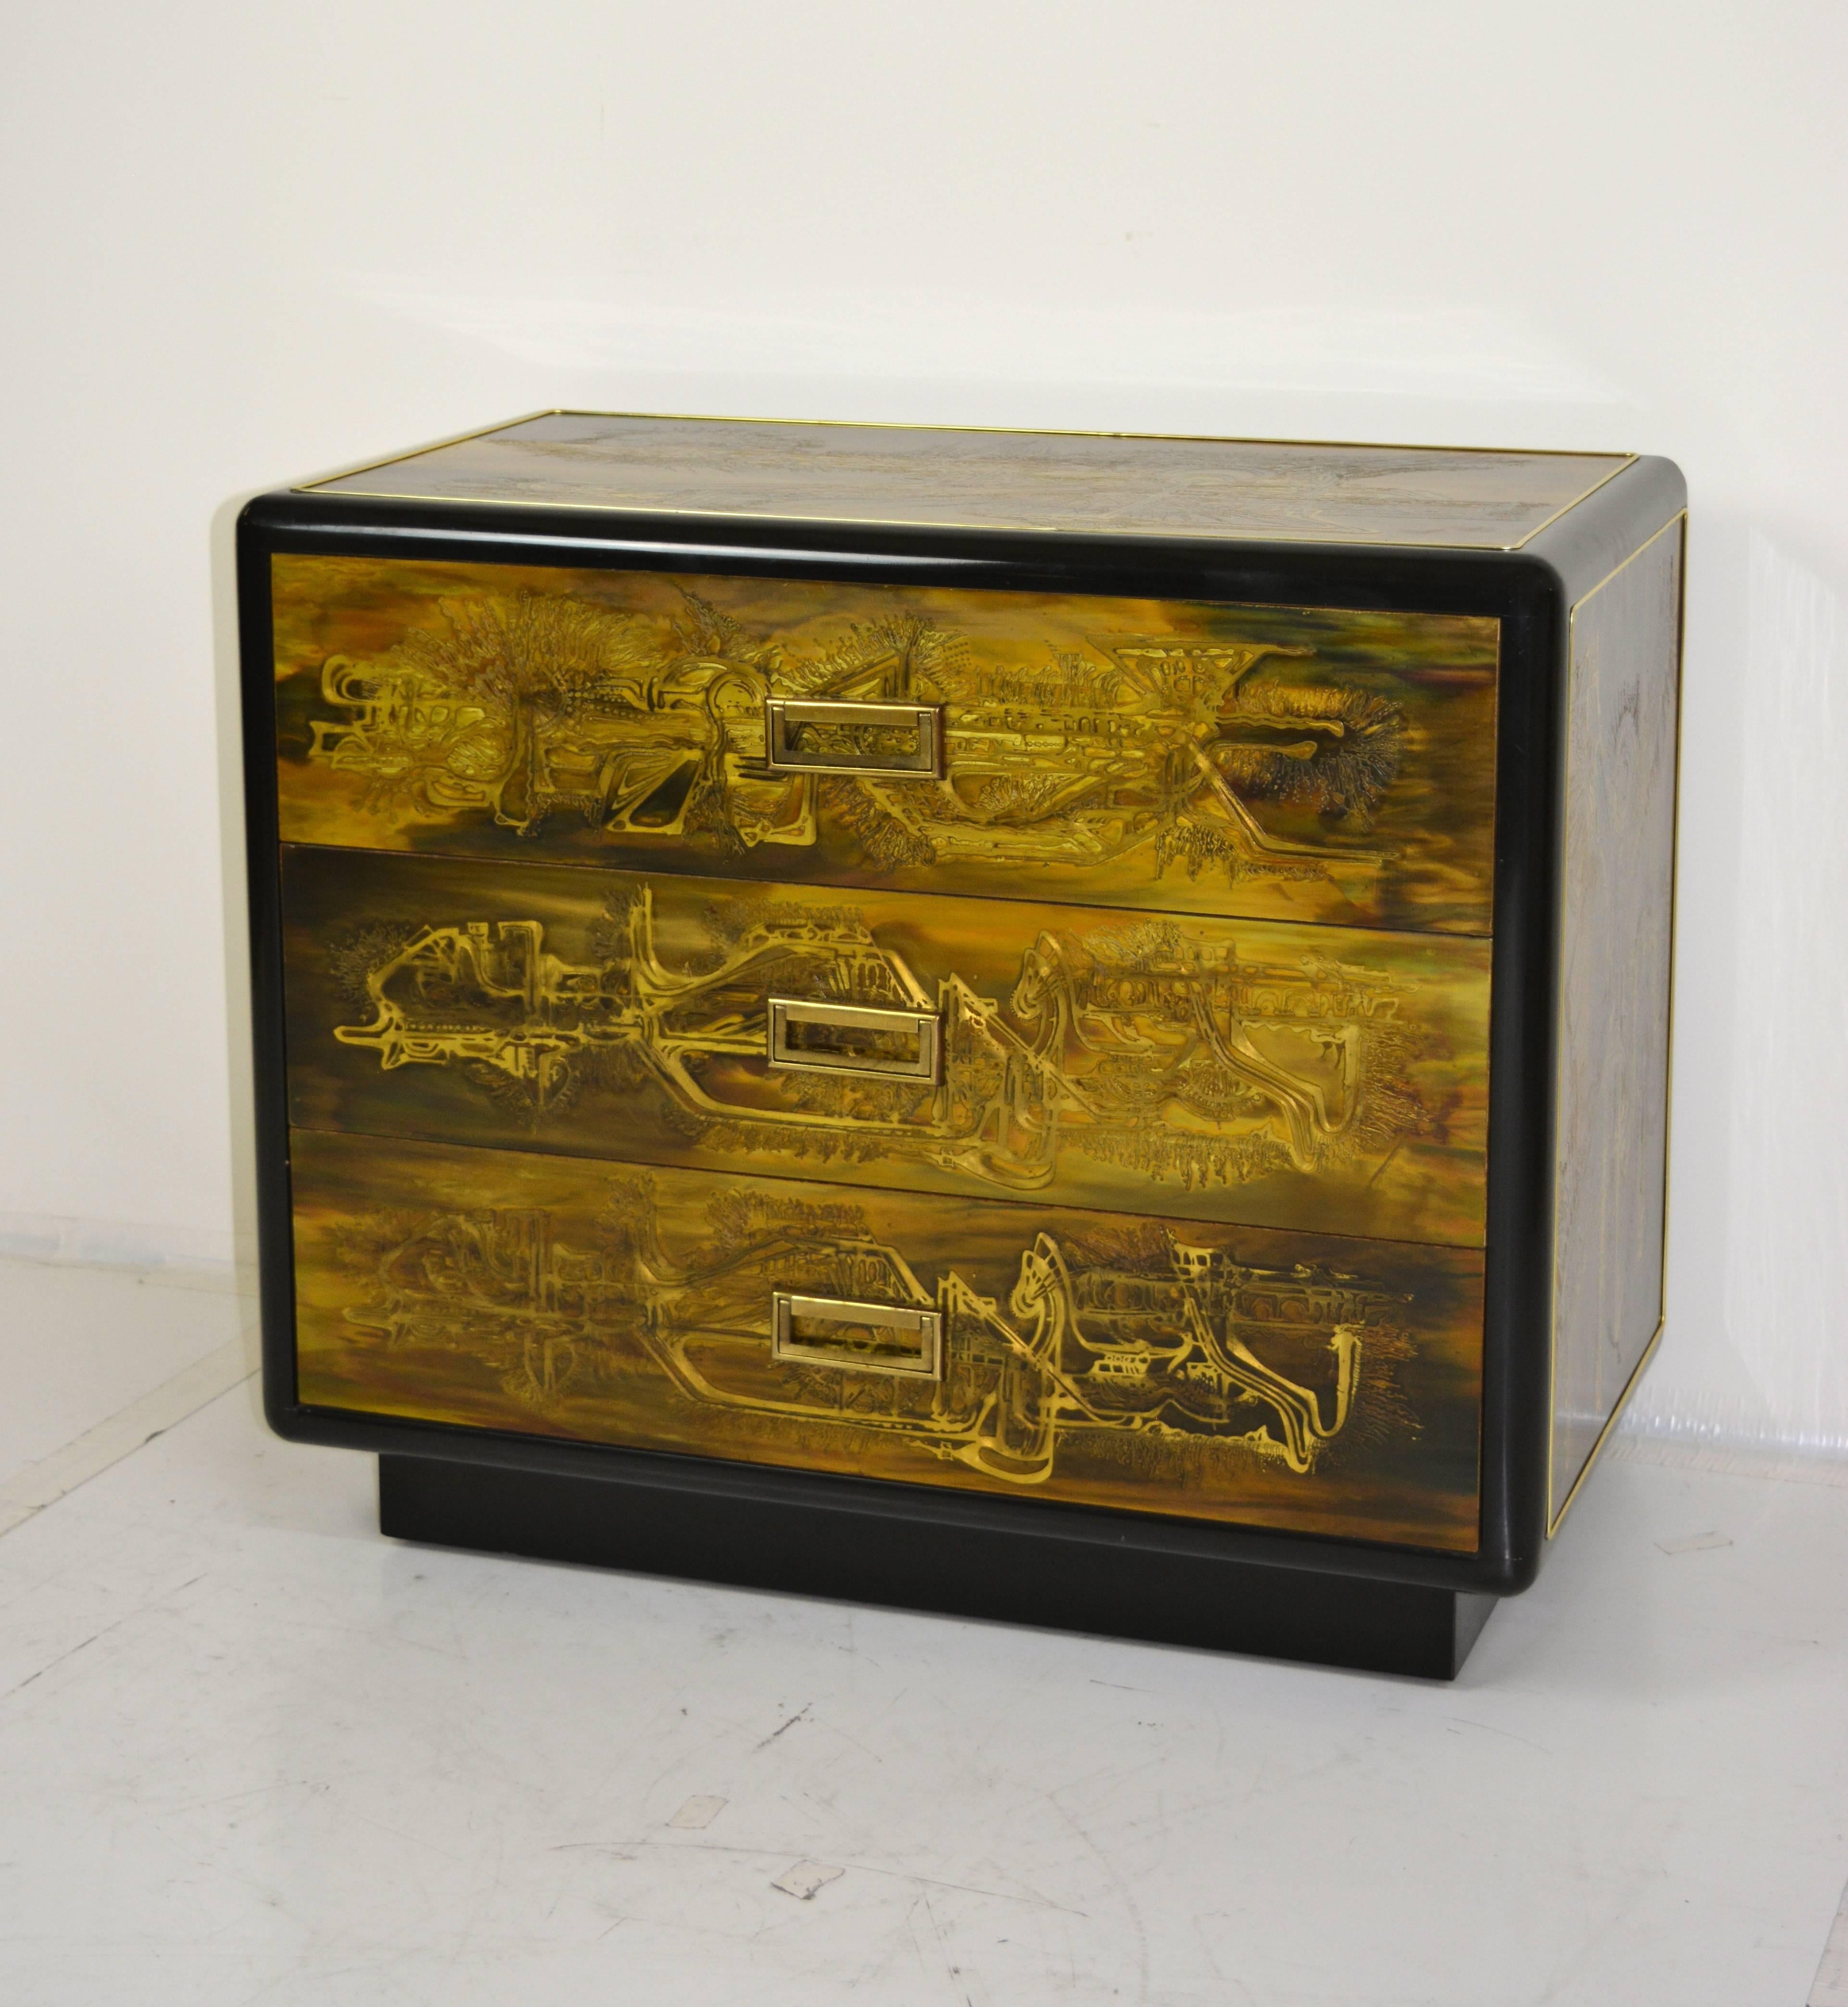 Acid etched and black lacquer cabinet by Bernhard Rohne for Mastercraft. Excellent condition, circa 1960s.